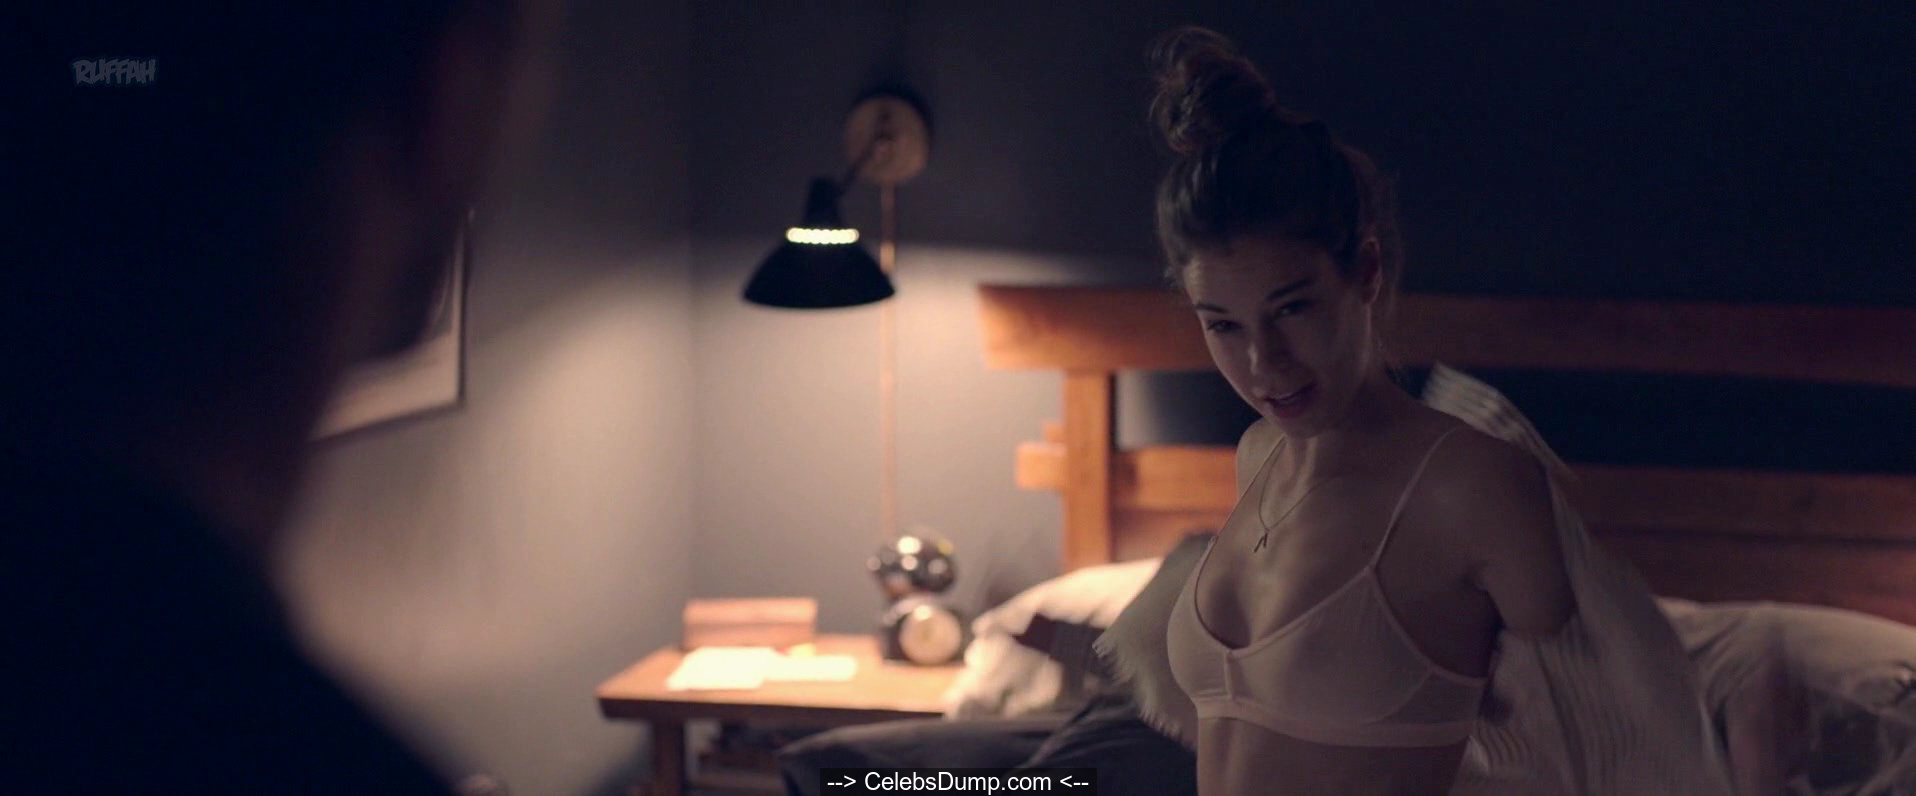 Laia Costa naked in sexual movie captures.